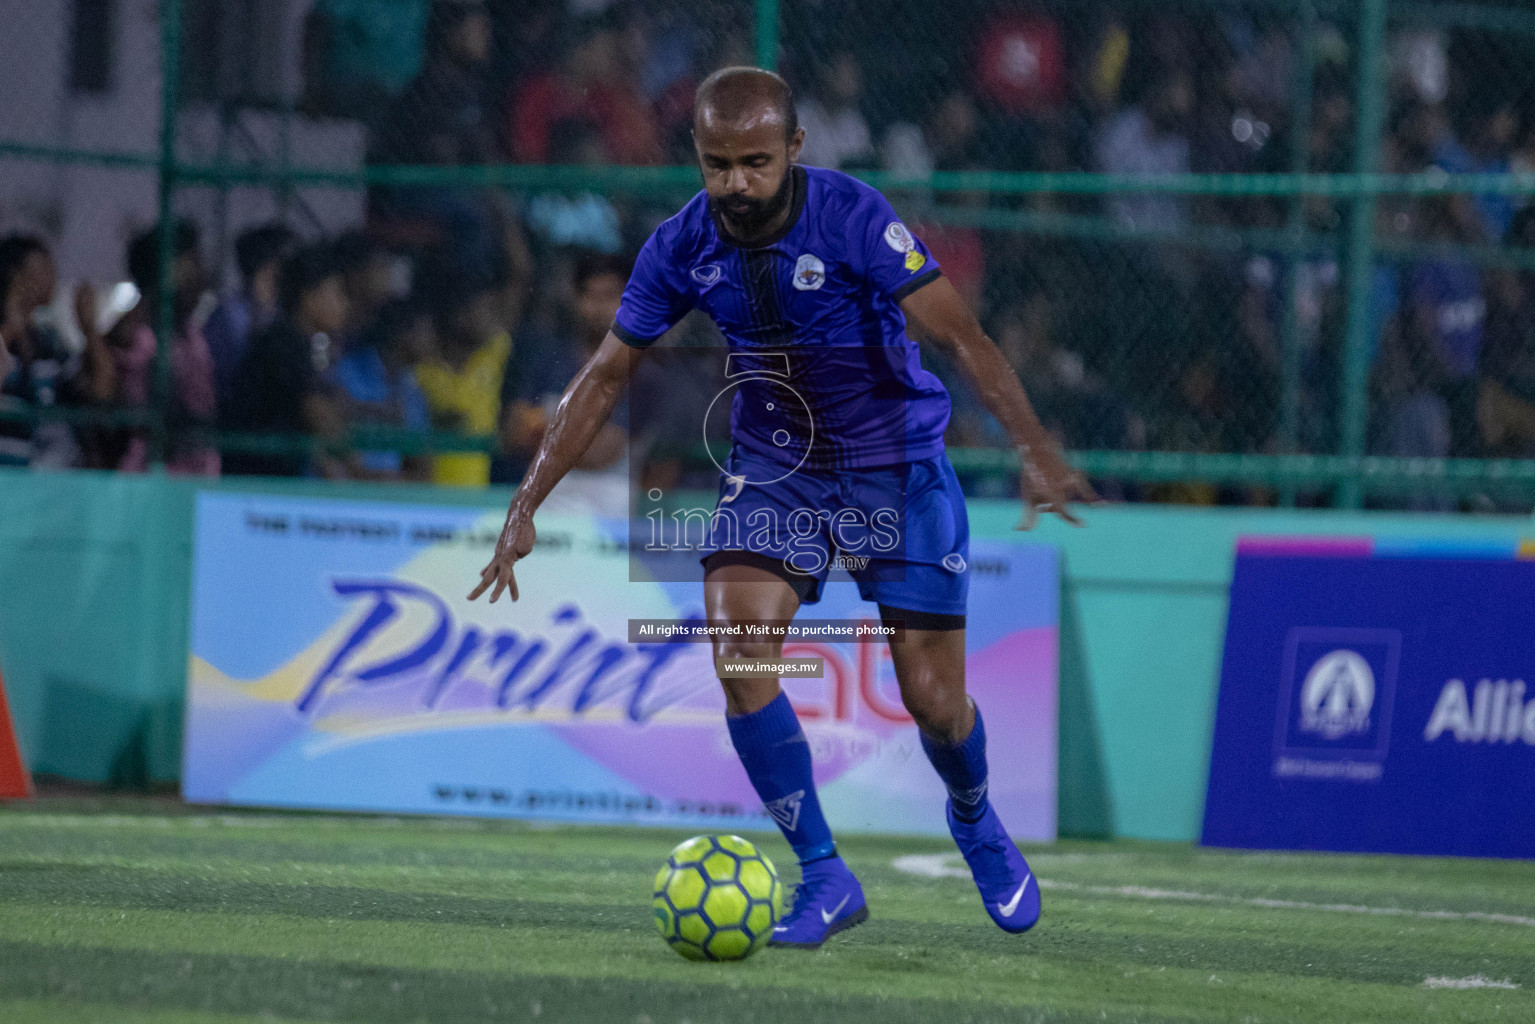 Club Maldives Day 11 in Hulhumale, Male', Maldives on 21st April 2019 Photos: Ismail Thoriq /images.mv